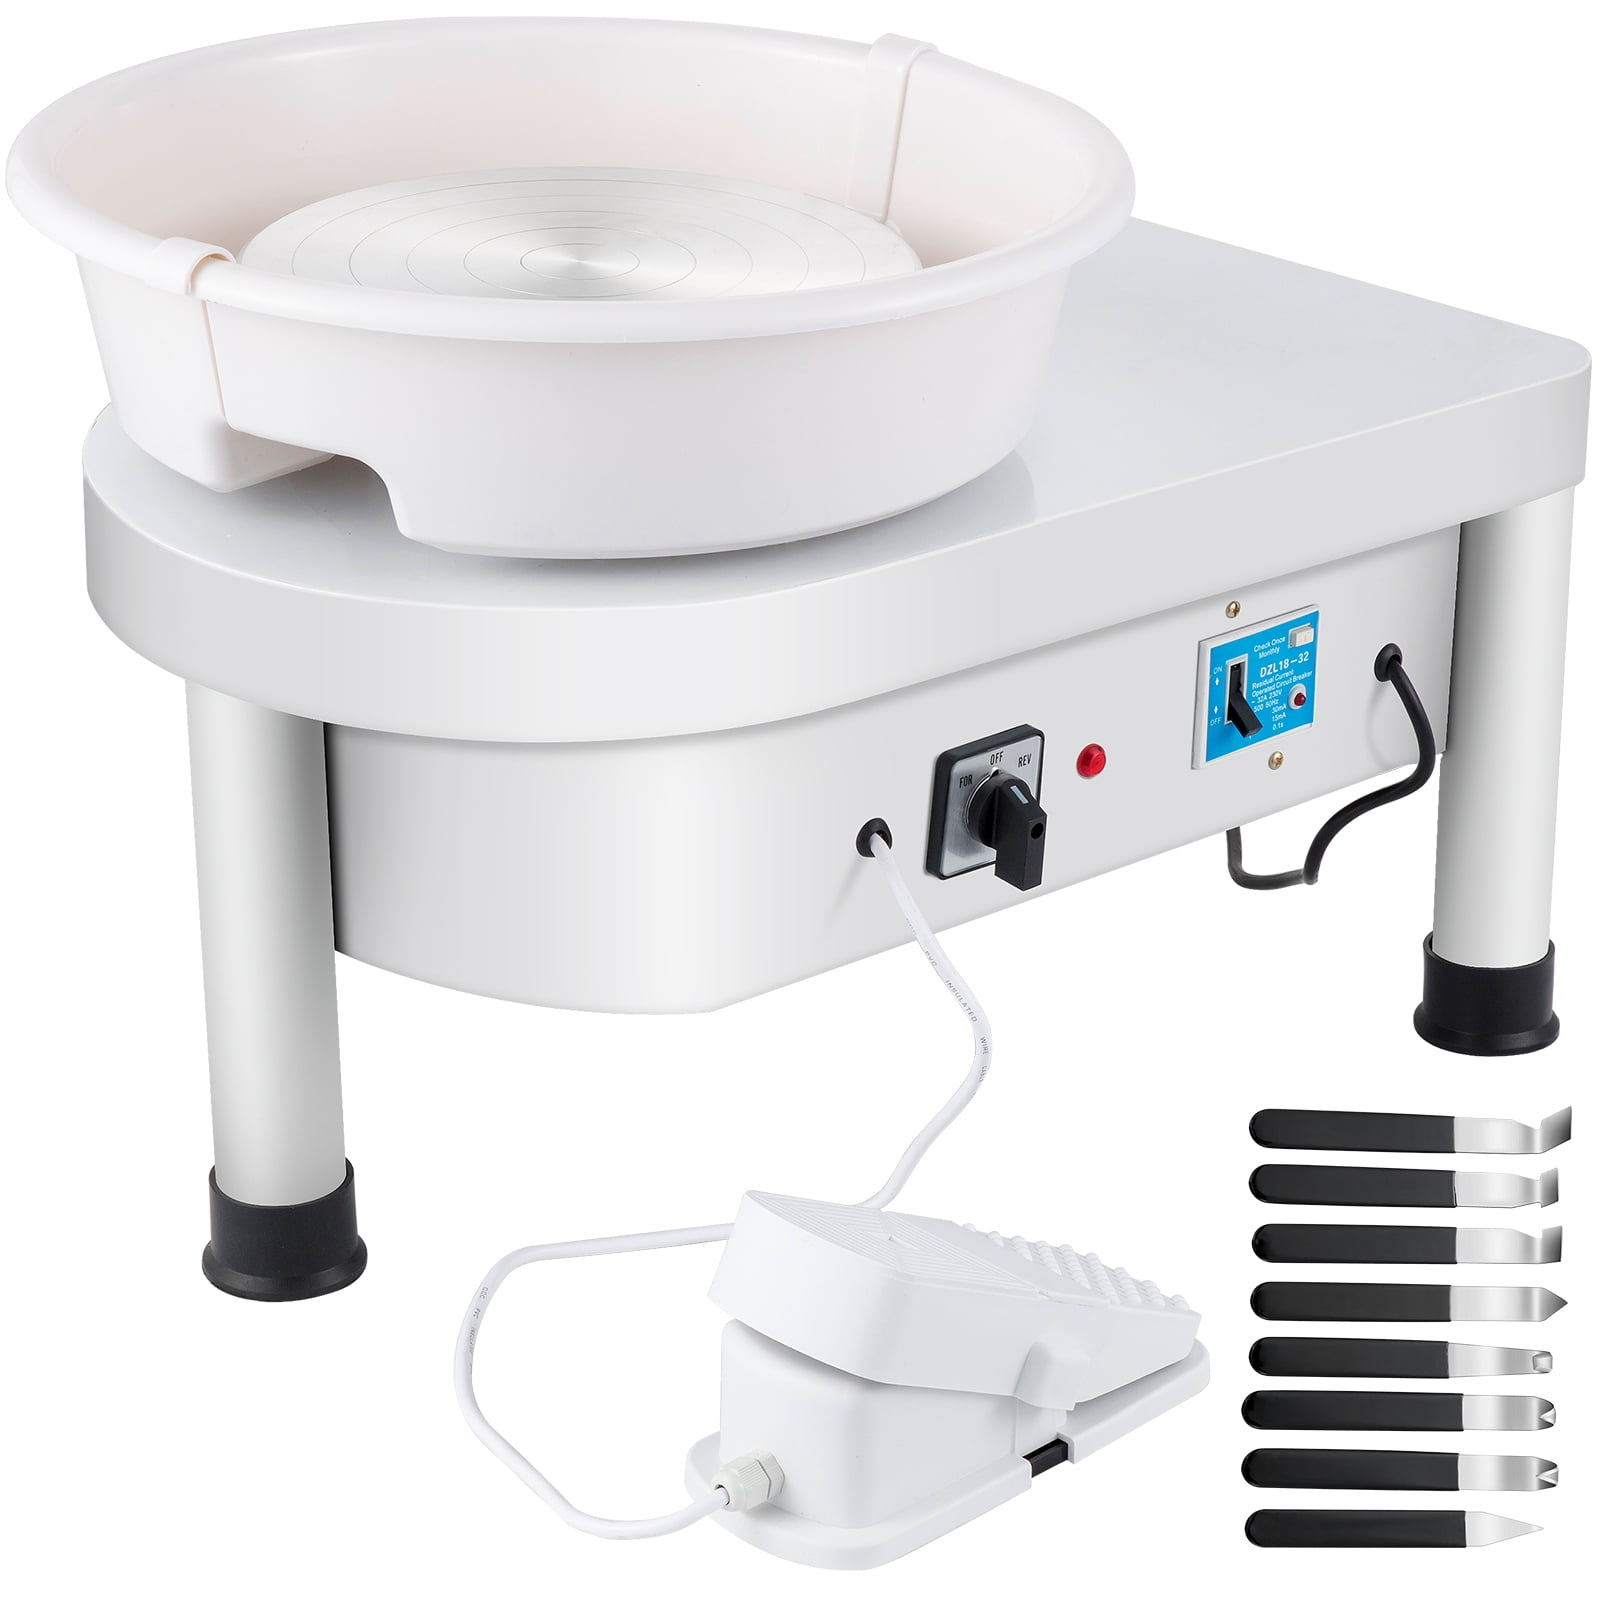 Pottery Wheel Machine UK Plug 350W 25cm Turntable Mini Pottery Machine with Removable Basin and Foot Pedal Clay Sculpture Tools for DIY Art Clay Making 